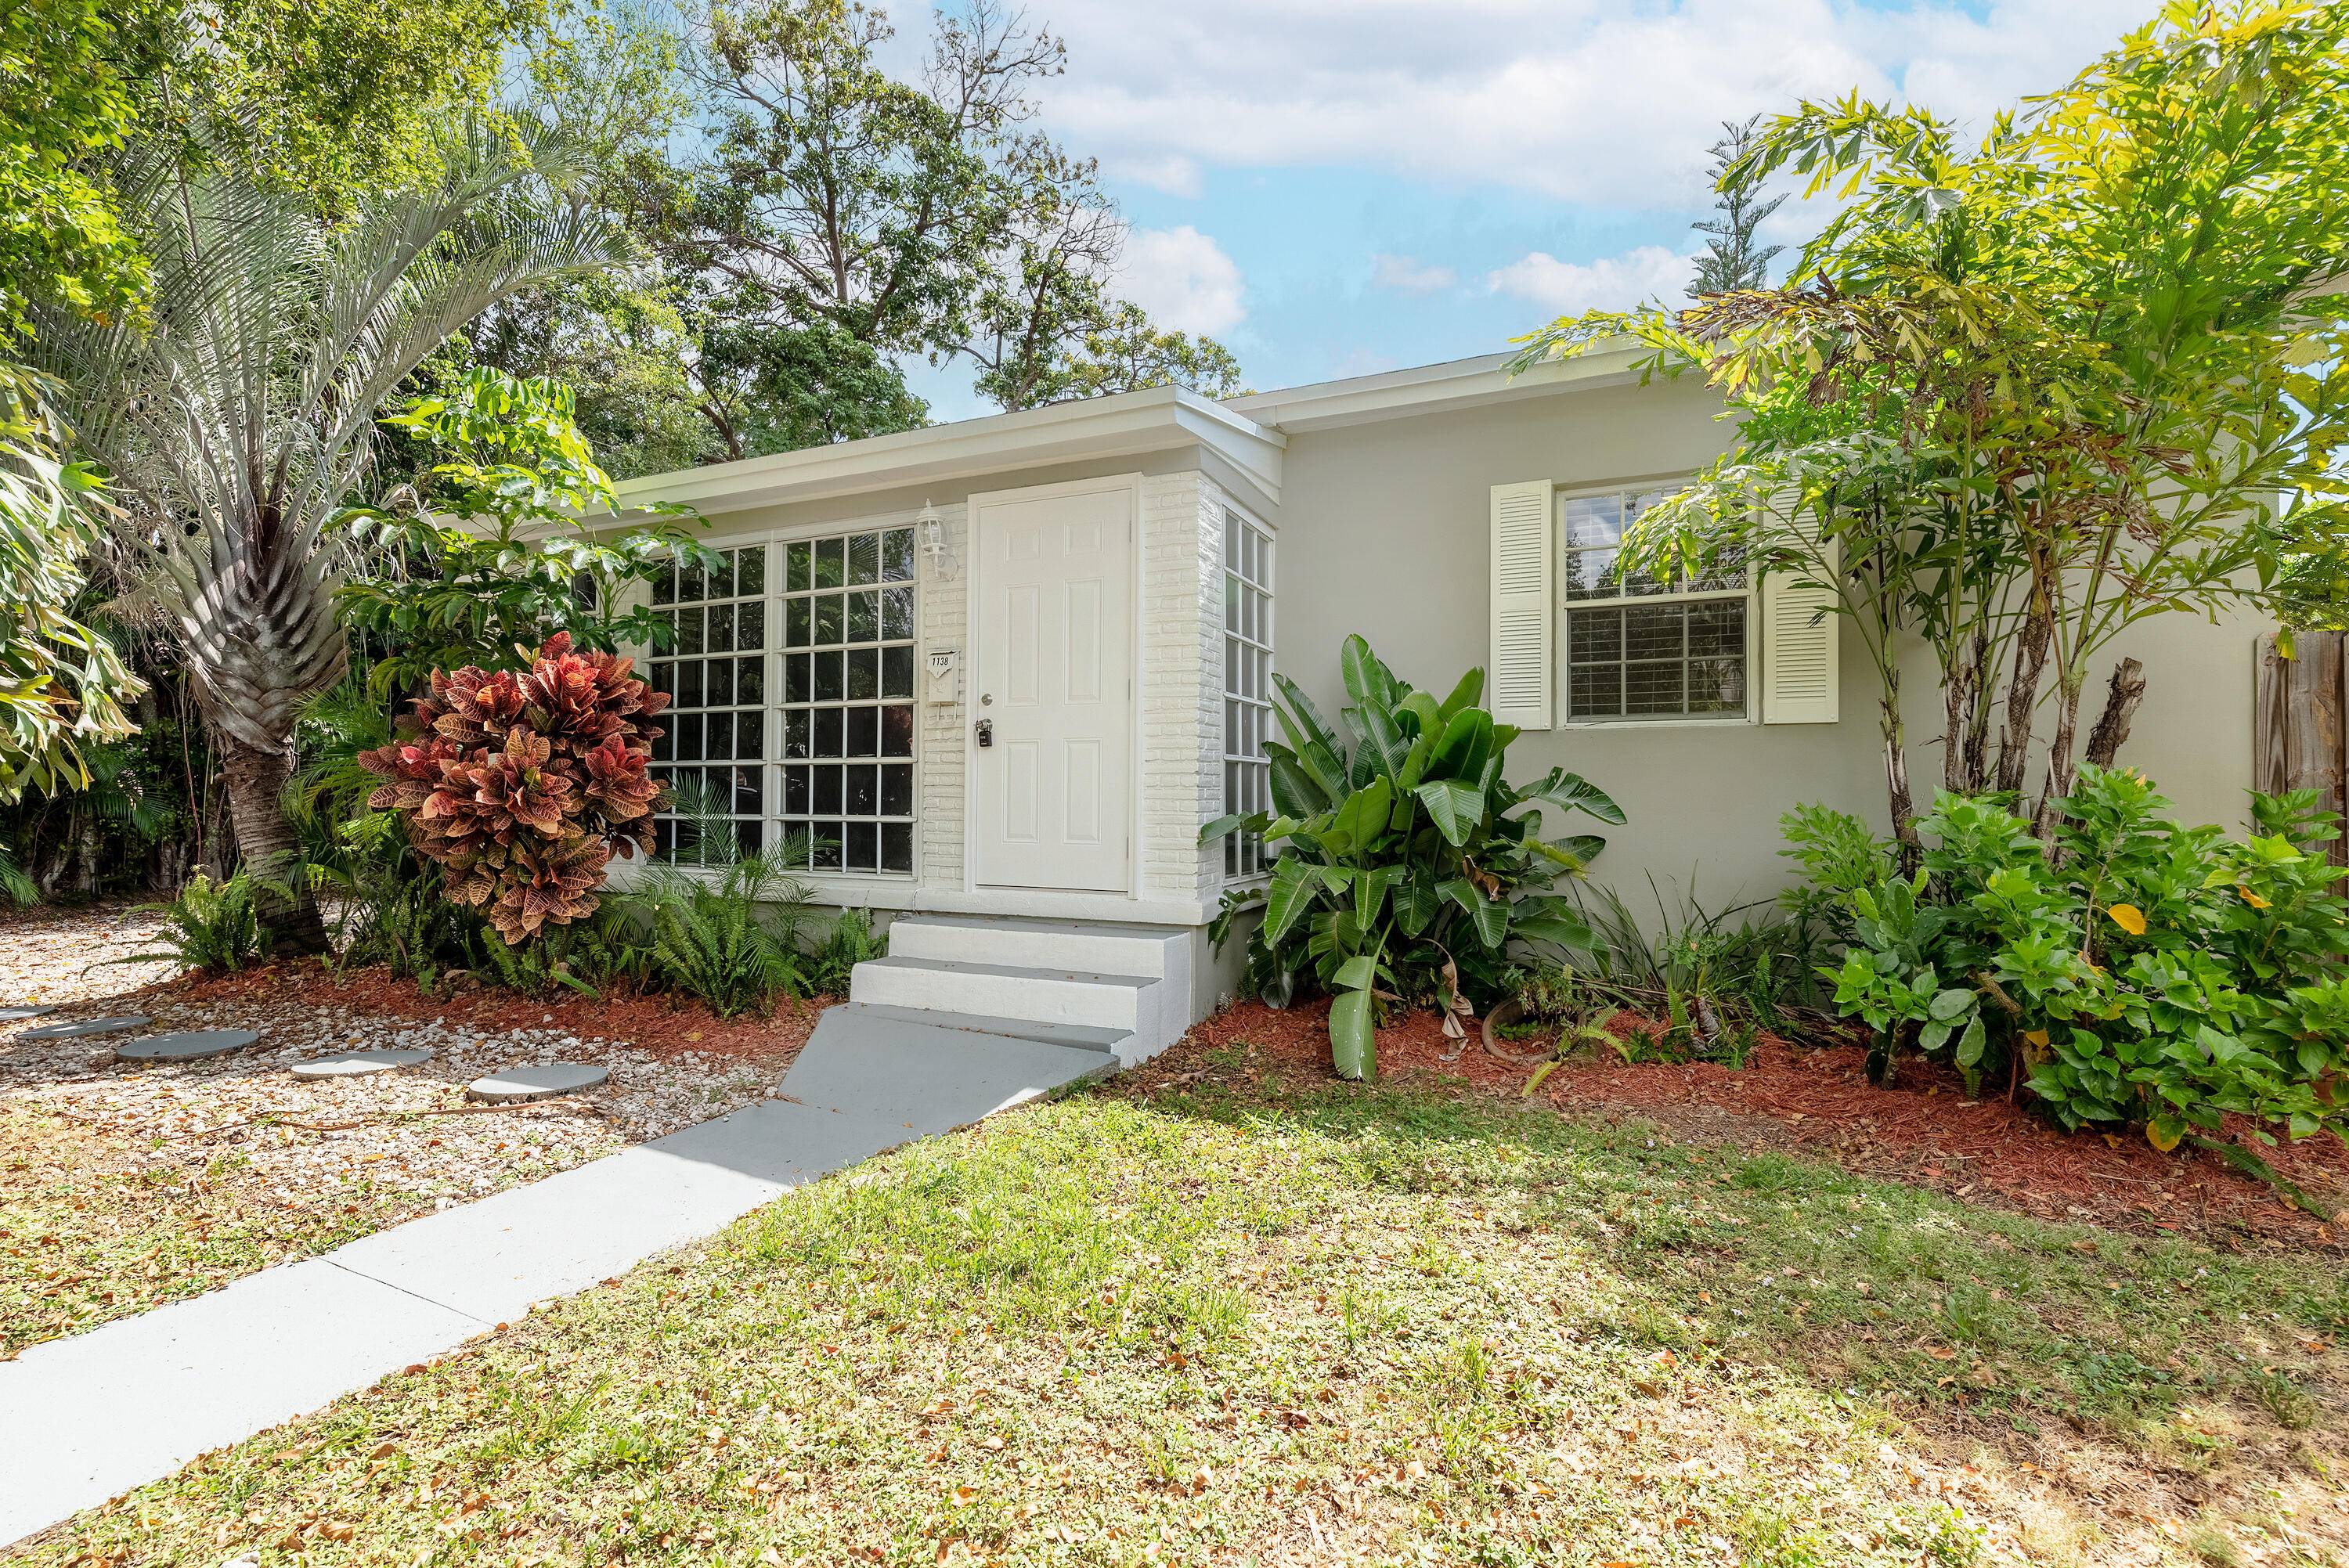 NEW ROOF ! ! NEW A C ! ! Quaint and cozy two bedroom, one bathroom single family home in popular Progresso neighborhood of Fort Lauderdale.